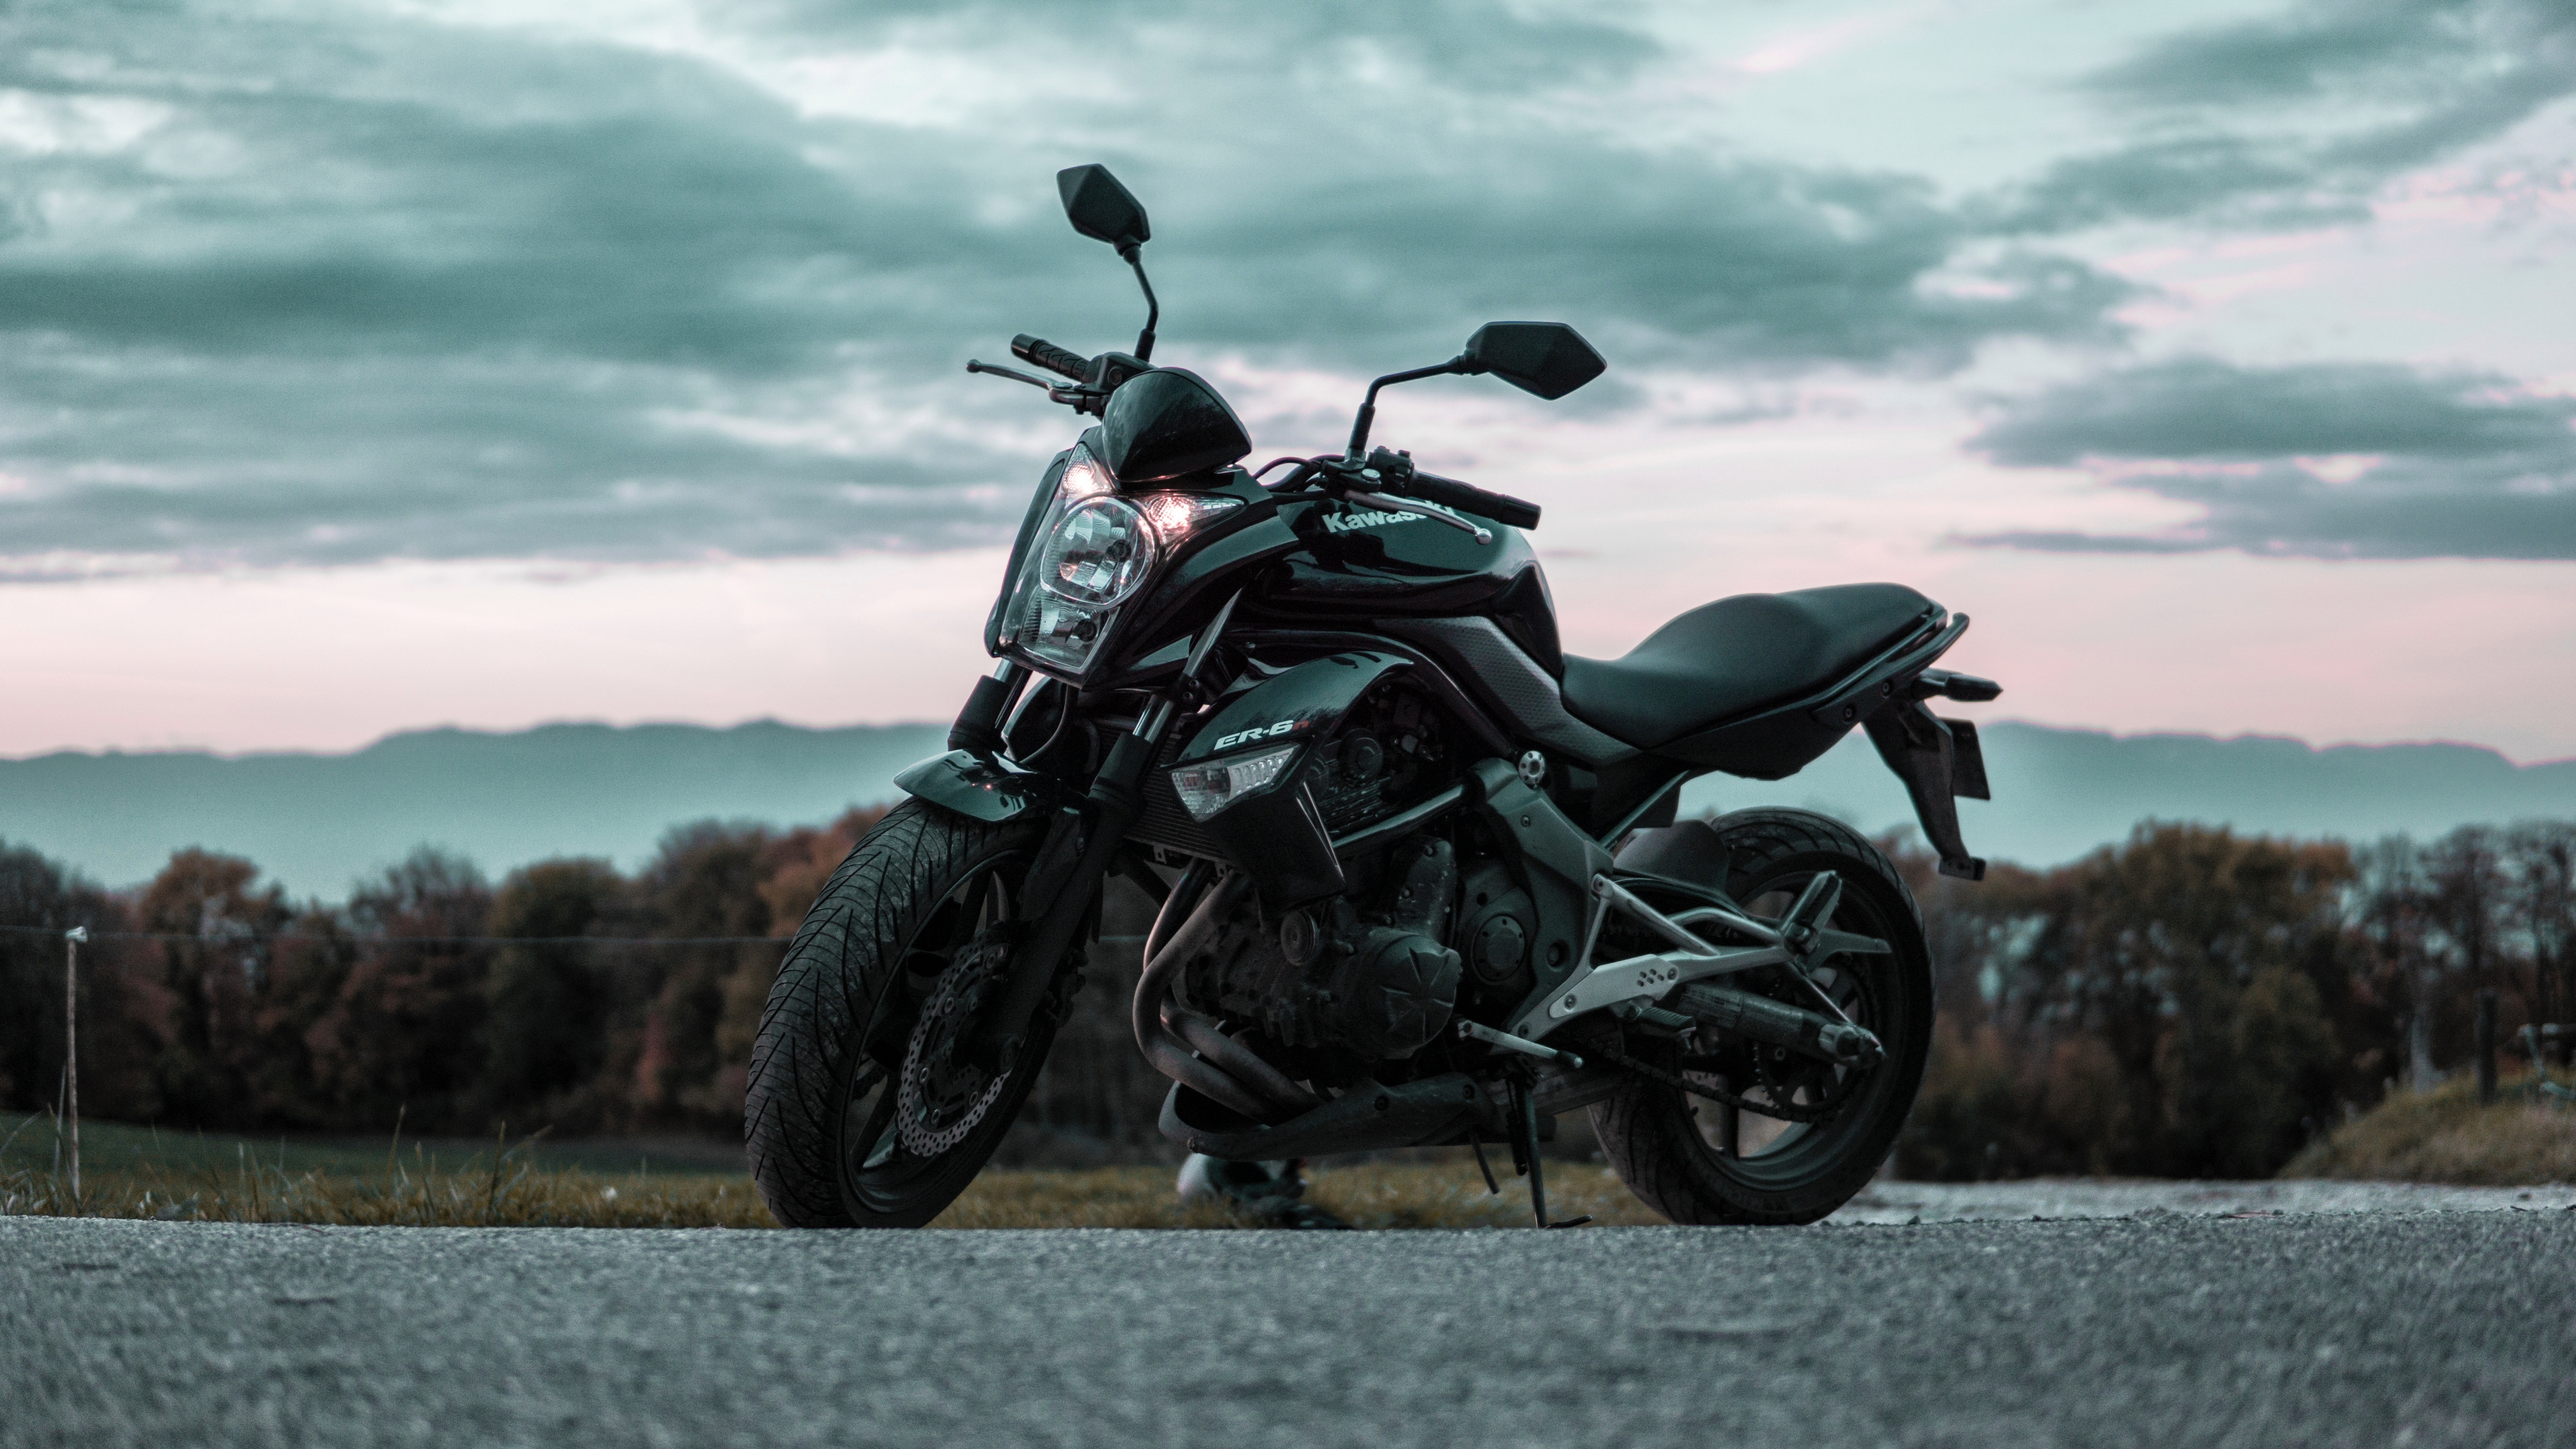 Black and Gray Motorcycle on Gray Asphalt Road During Daytime. Wallpaper in 3840x2160 Resolution